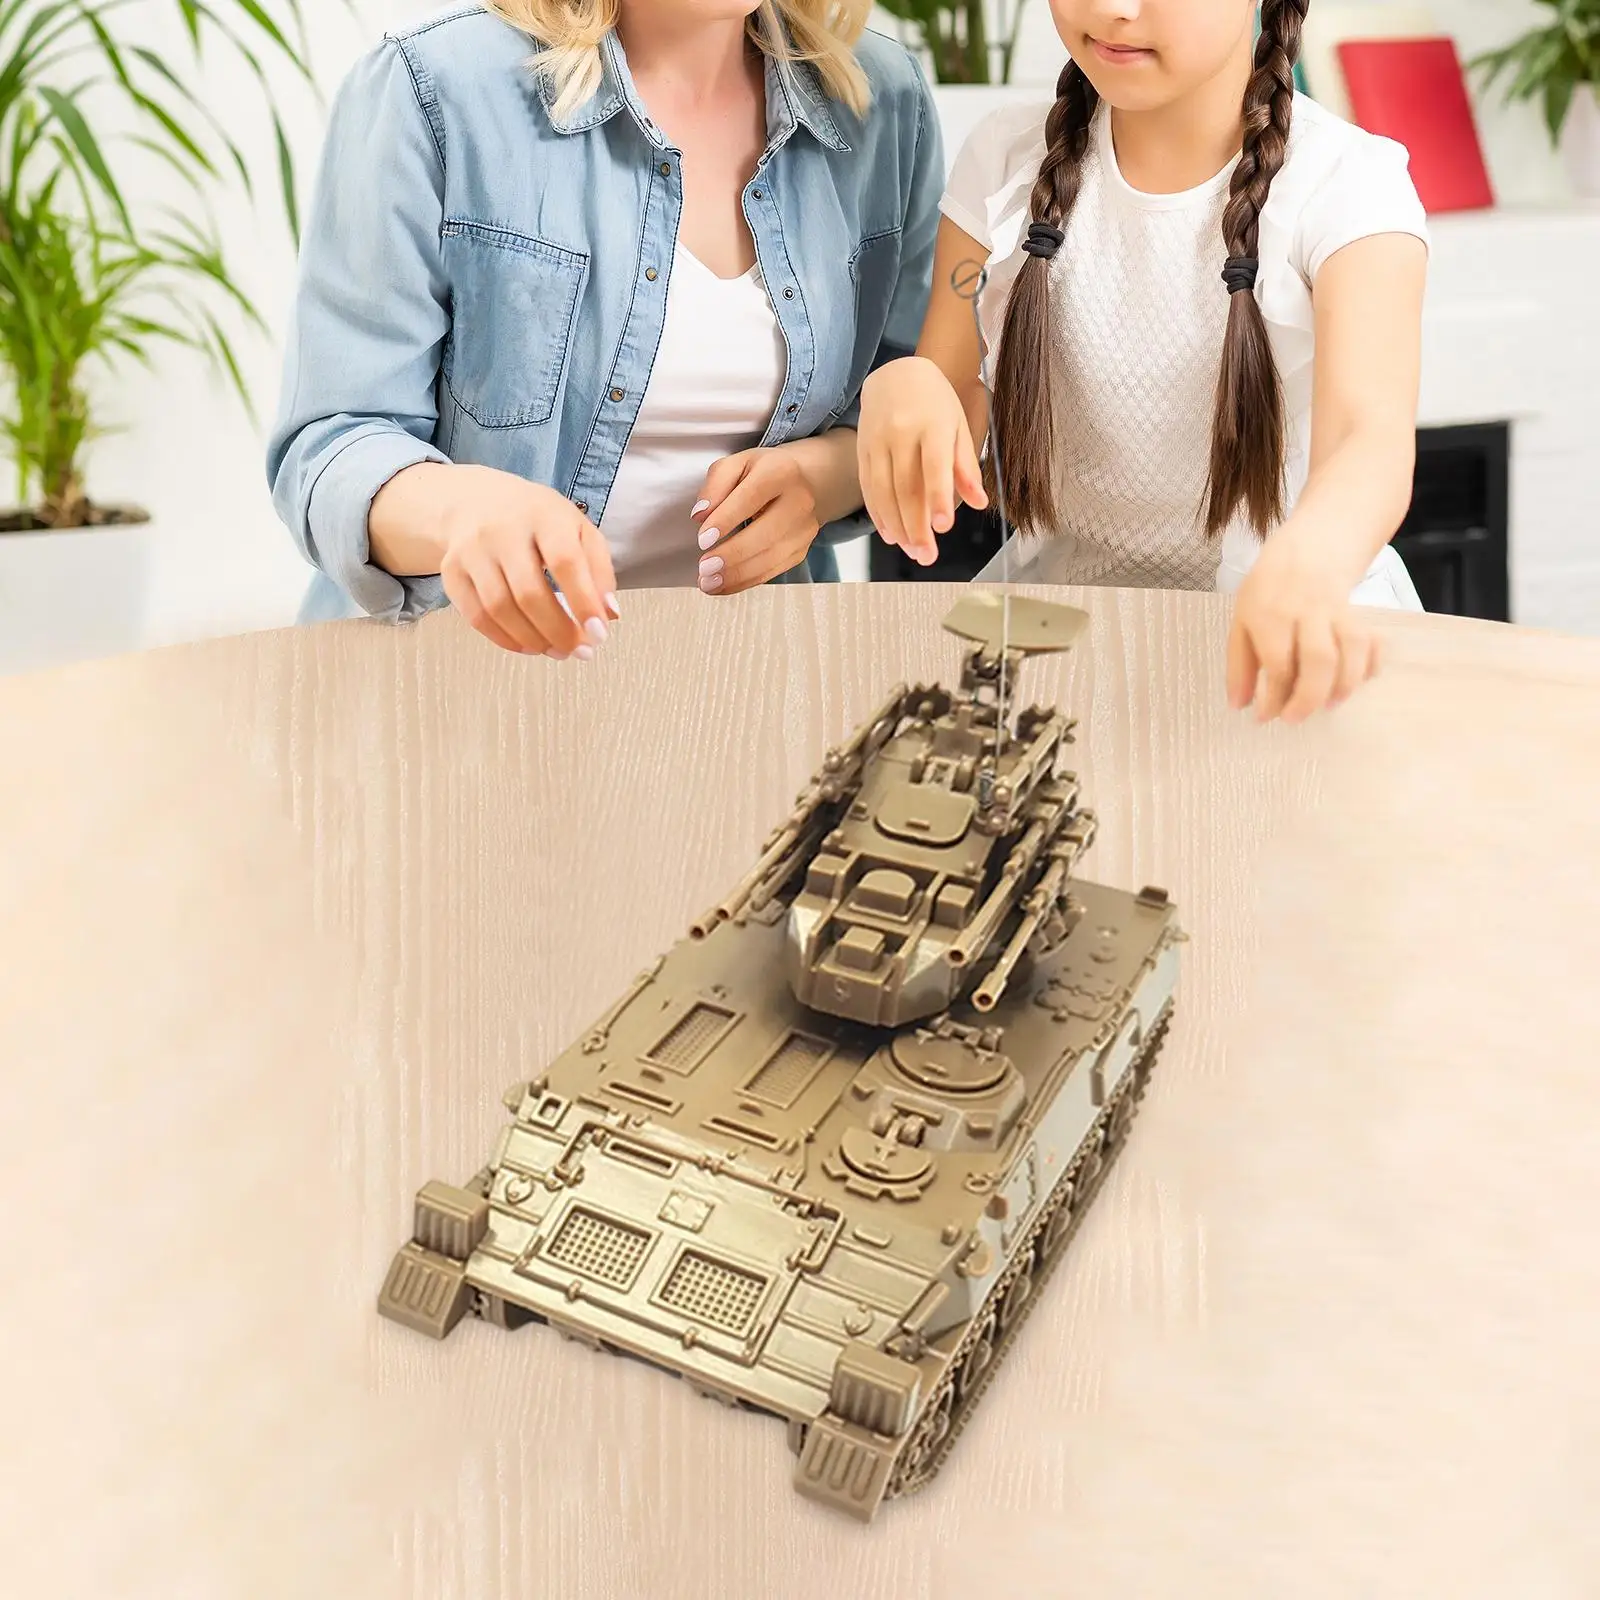 1:72 Scale Reconnaissance Vehicles 4D Tank Model Tracked Crawler Chariot for Keepsake Tabletop Decor Education Toy Gift Adults